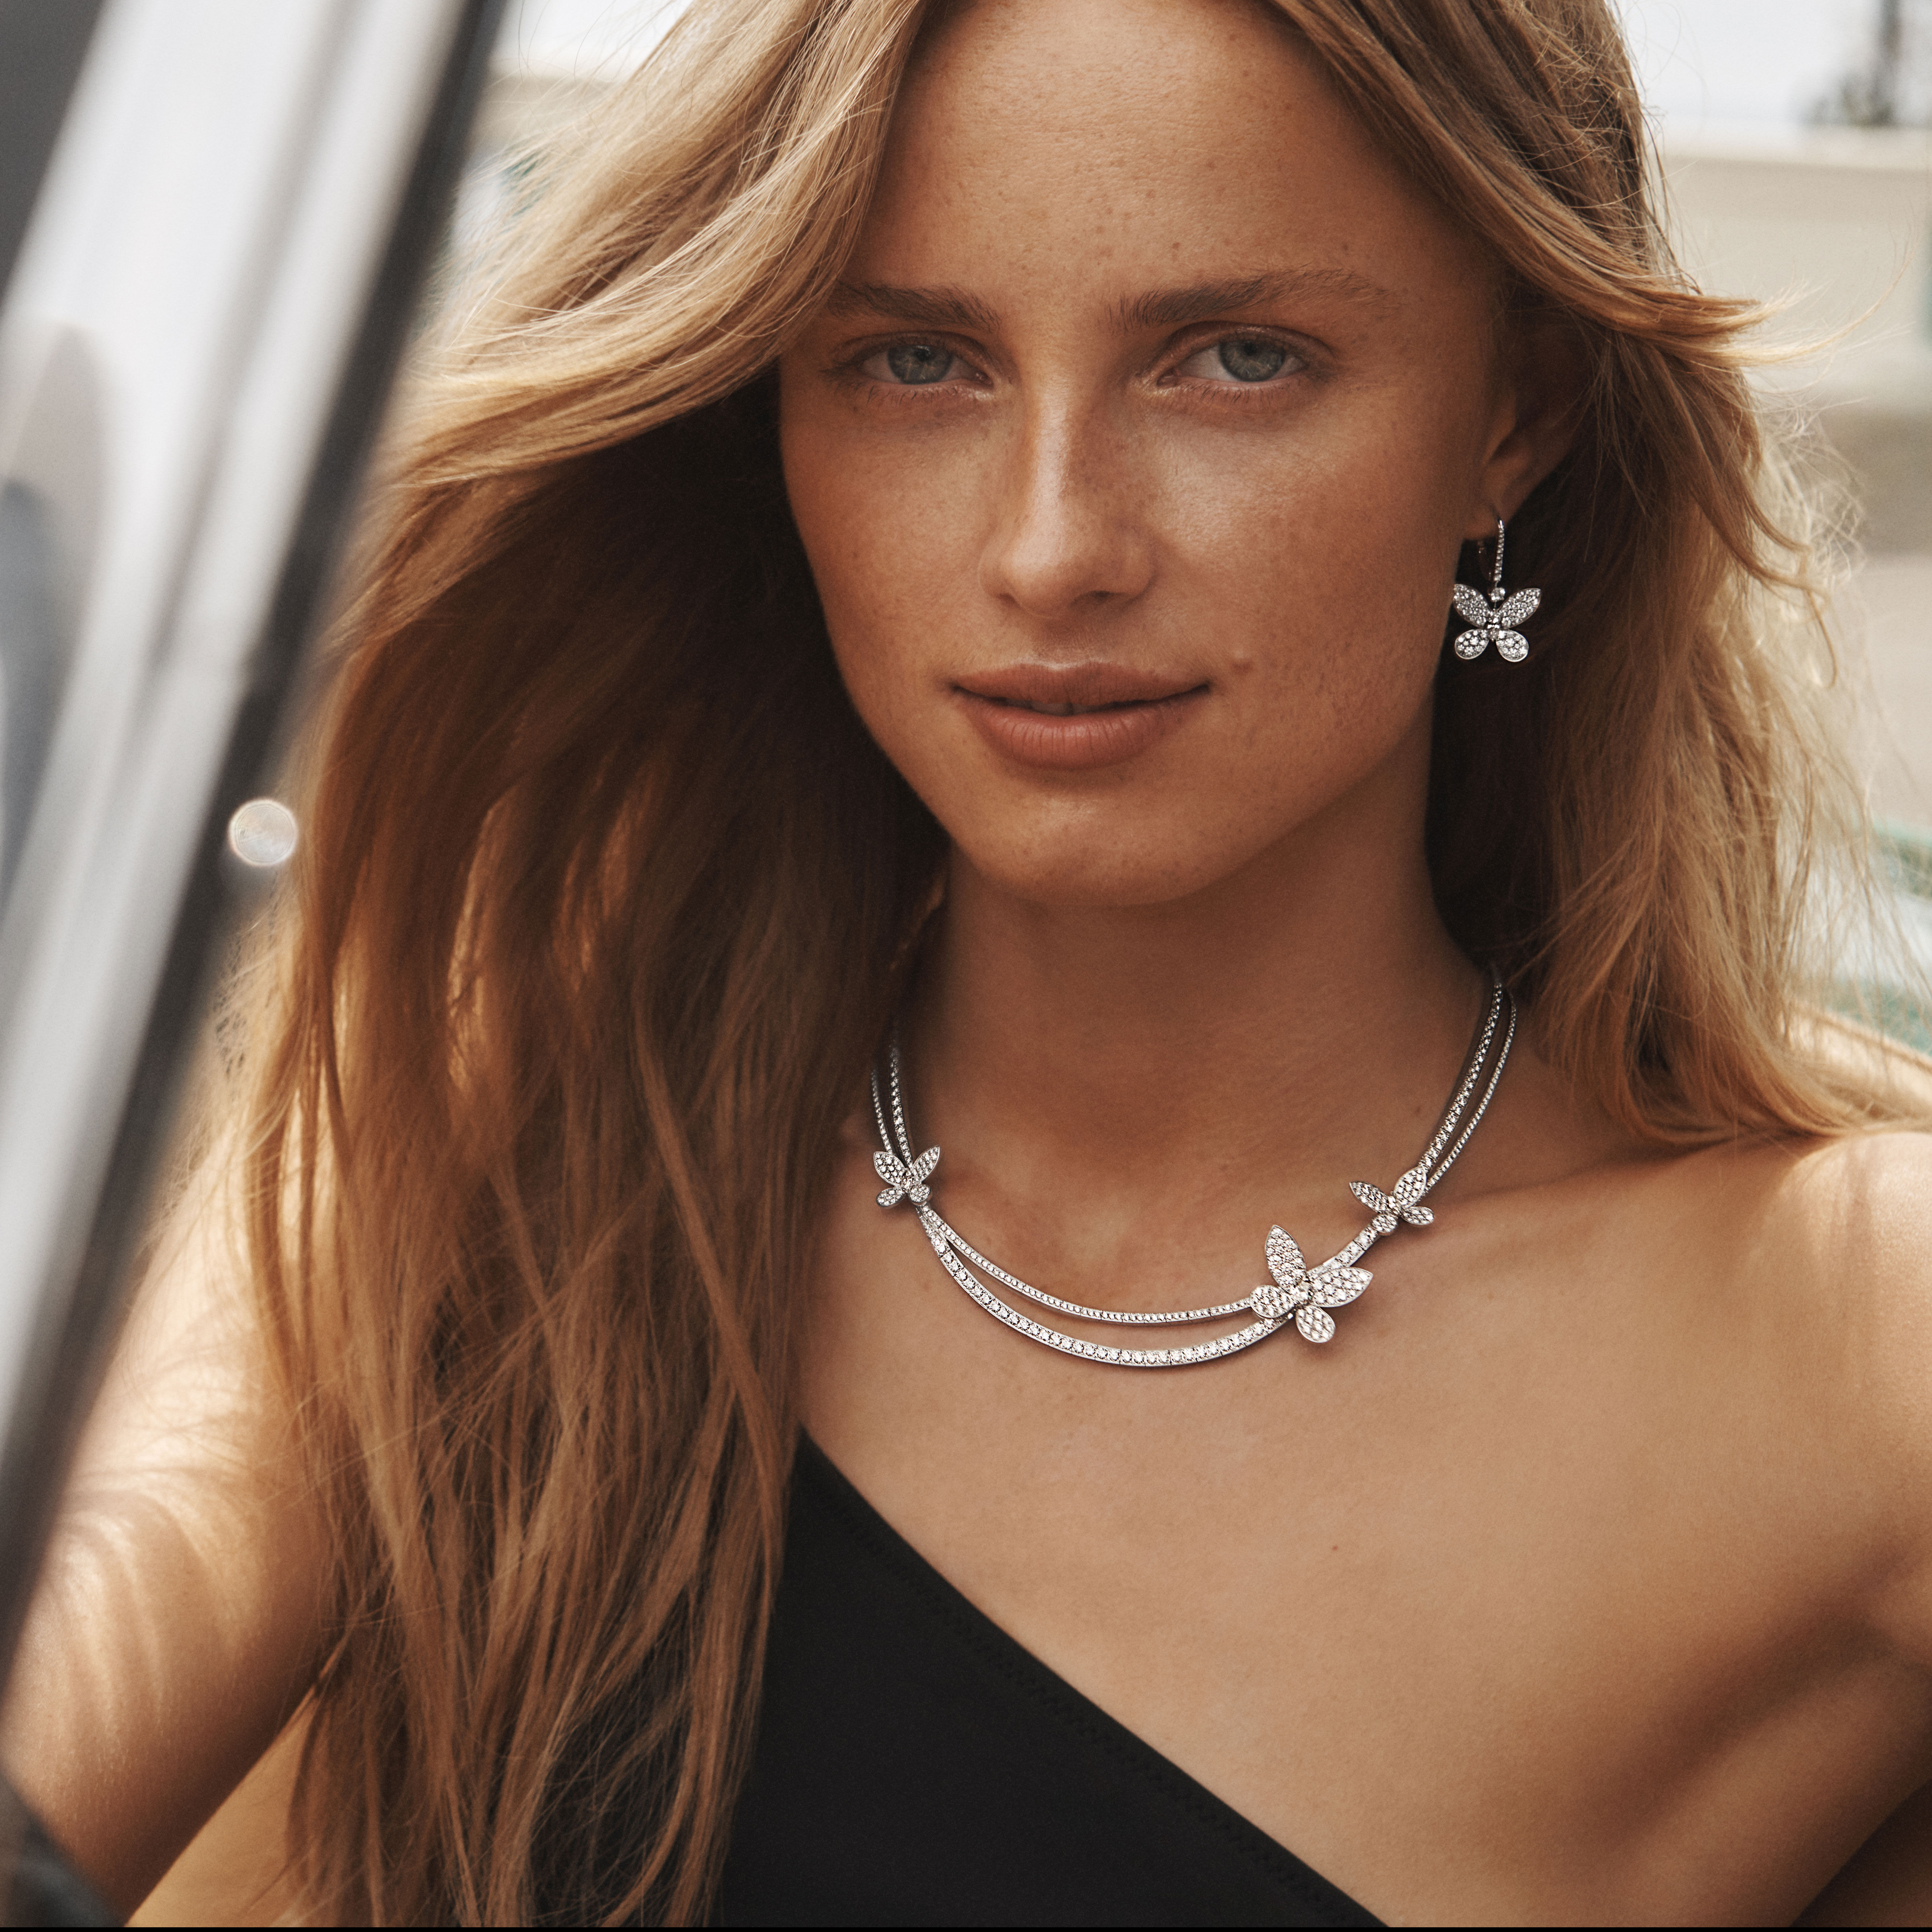 Model wears Graff Tilda's Bow collection white diamond necklace and earrings.